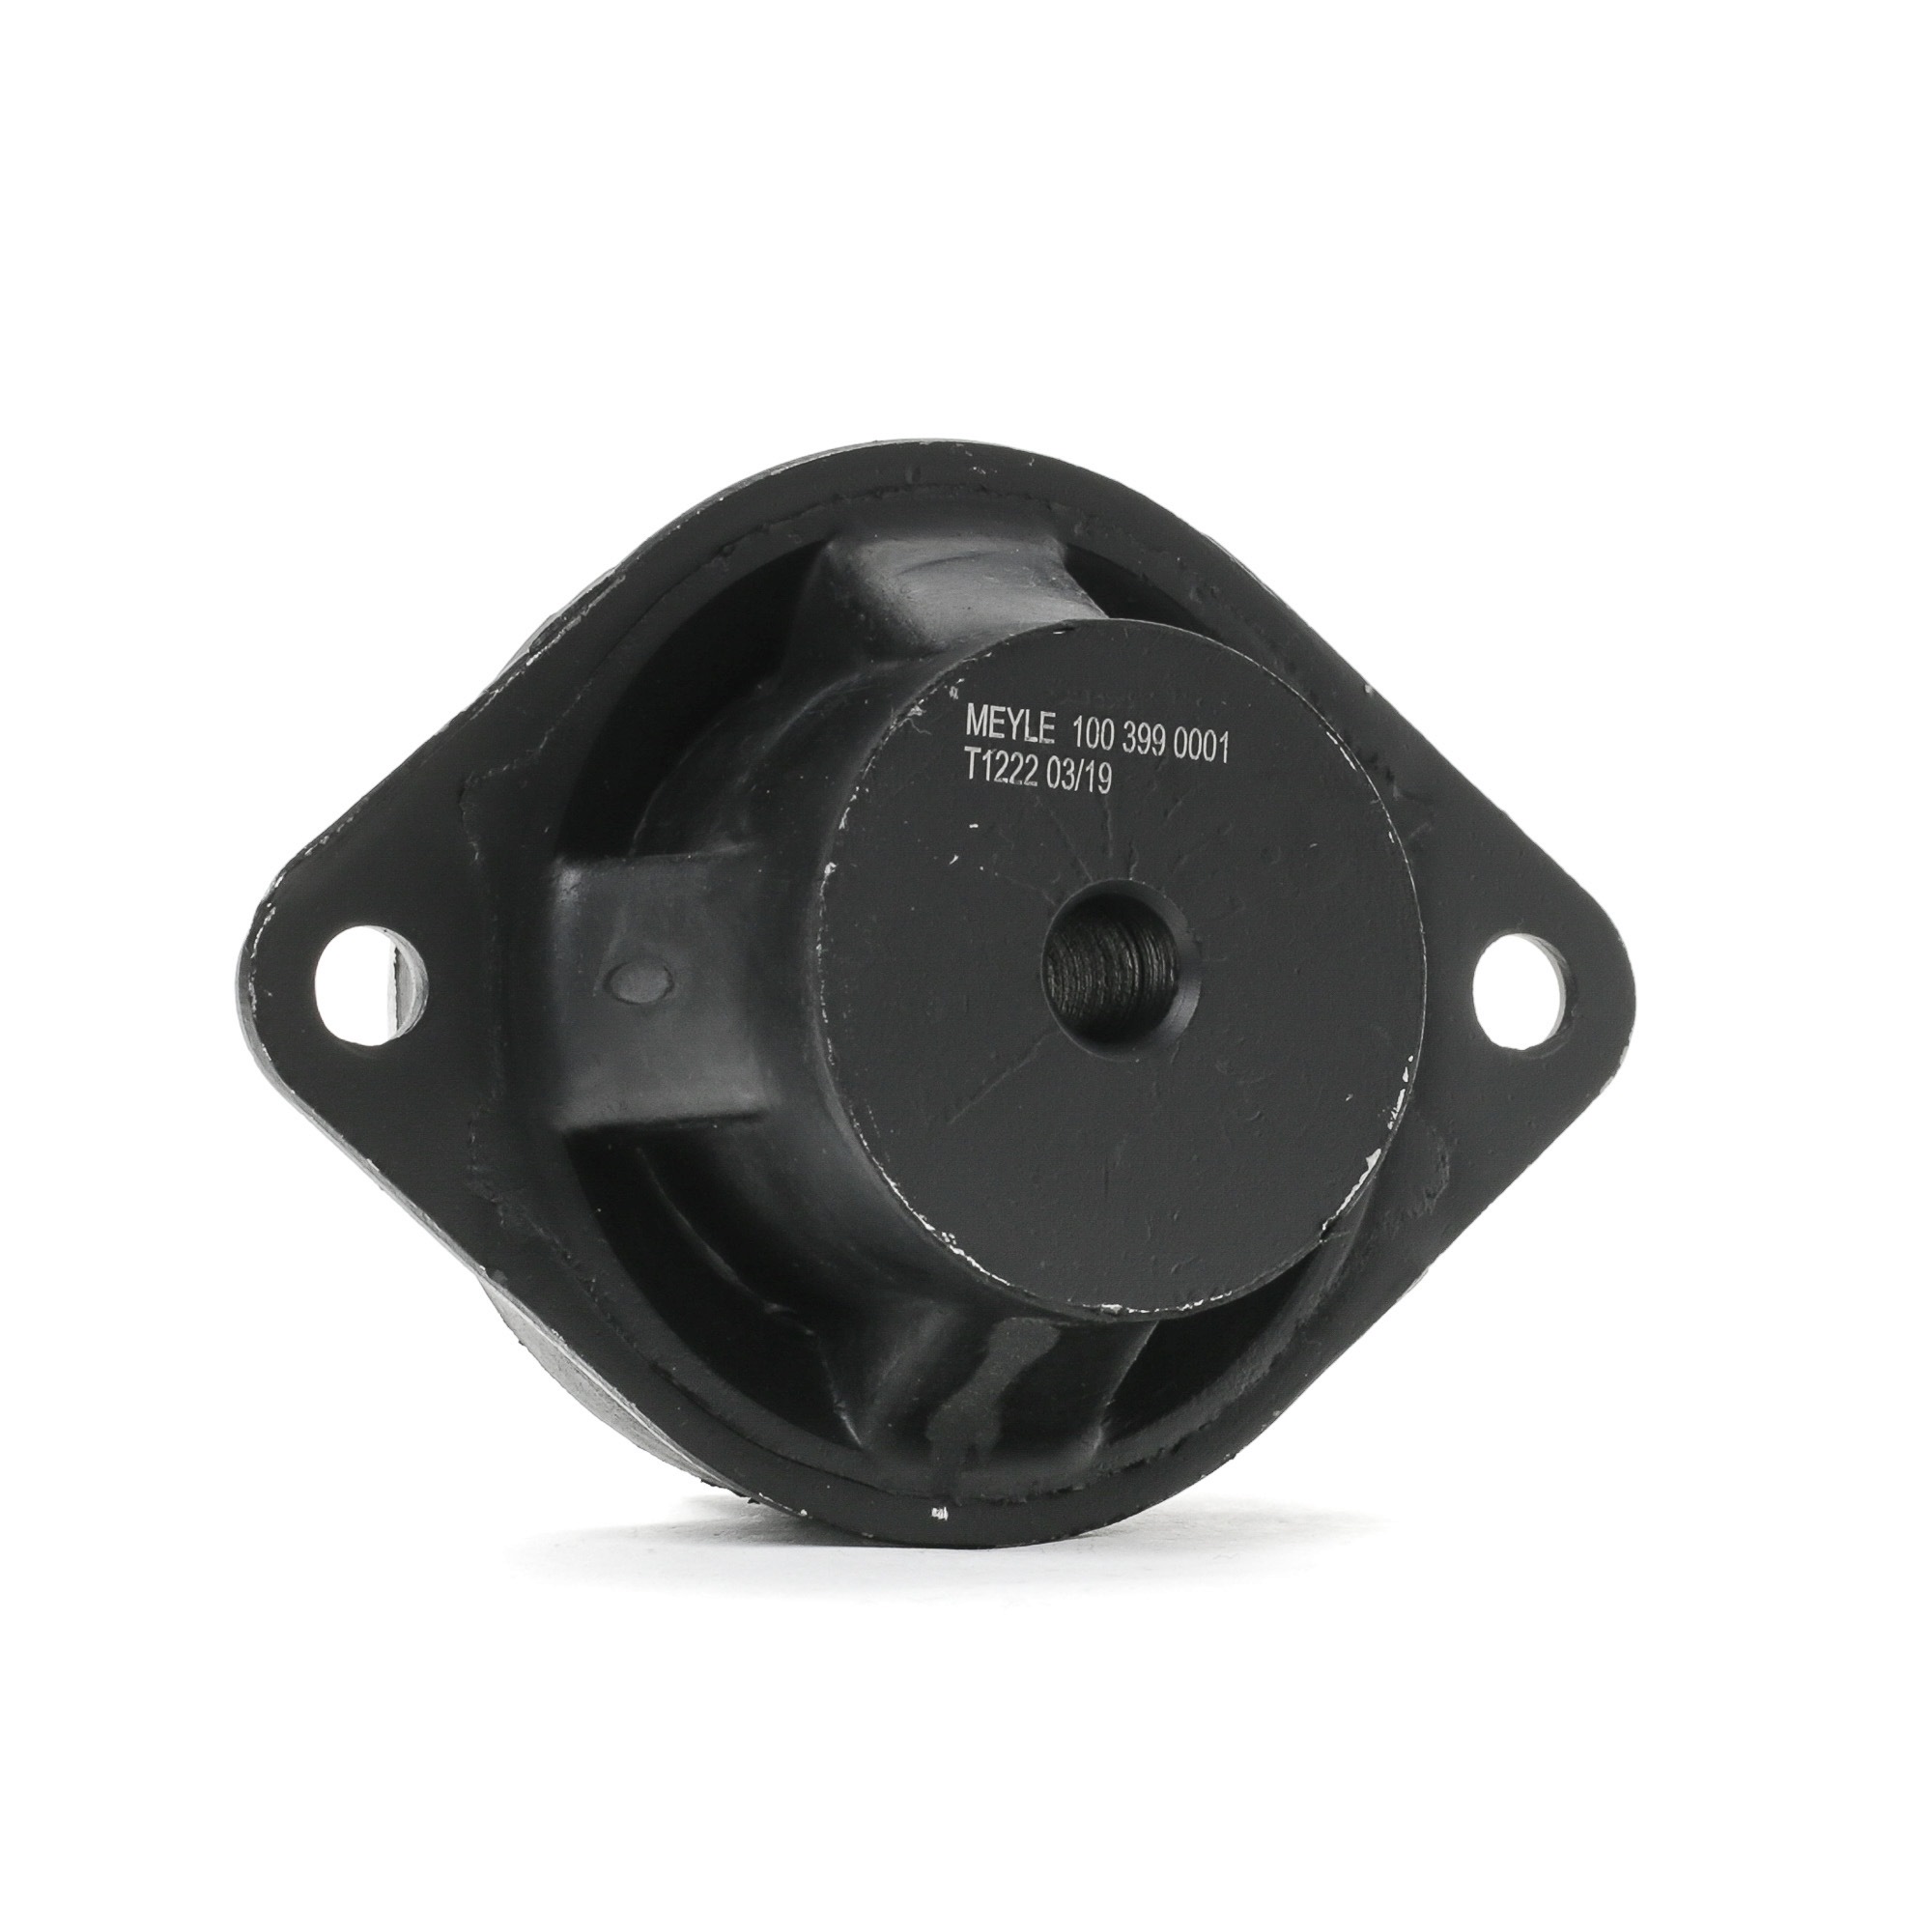 Image of MEYLE Gearbox Mount VW,AUDI 100 399 0001 431399151D,MTM0029,431399151D Transmission Mount,Mounting, automatic transmission